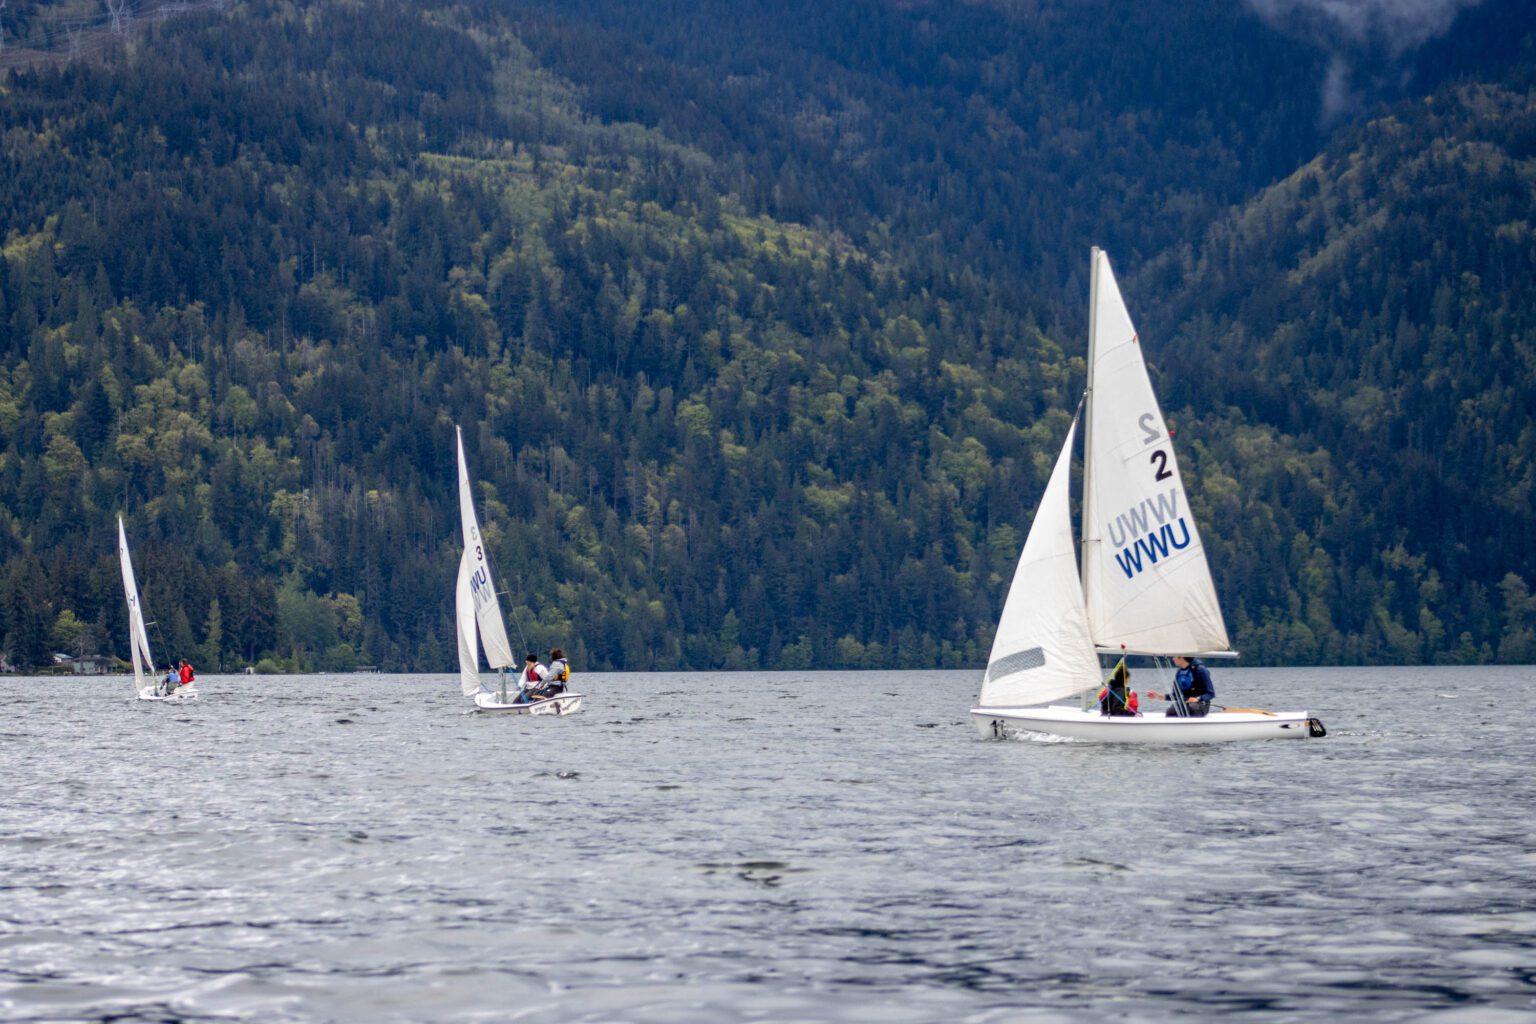 Lakewood celebrated its 100th anniversary May 14. Saturday's festivities included a sailboat race on Lake Whatcom